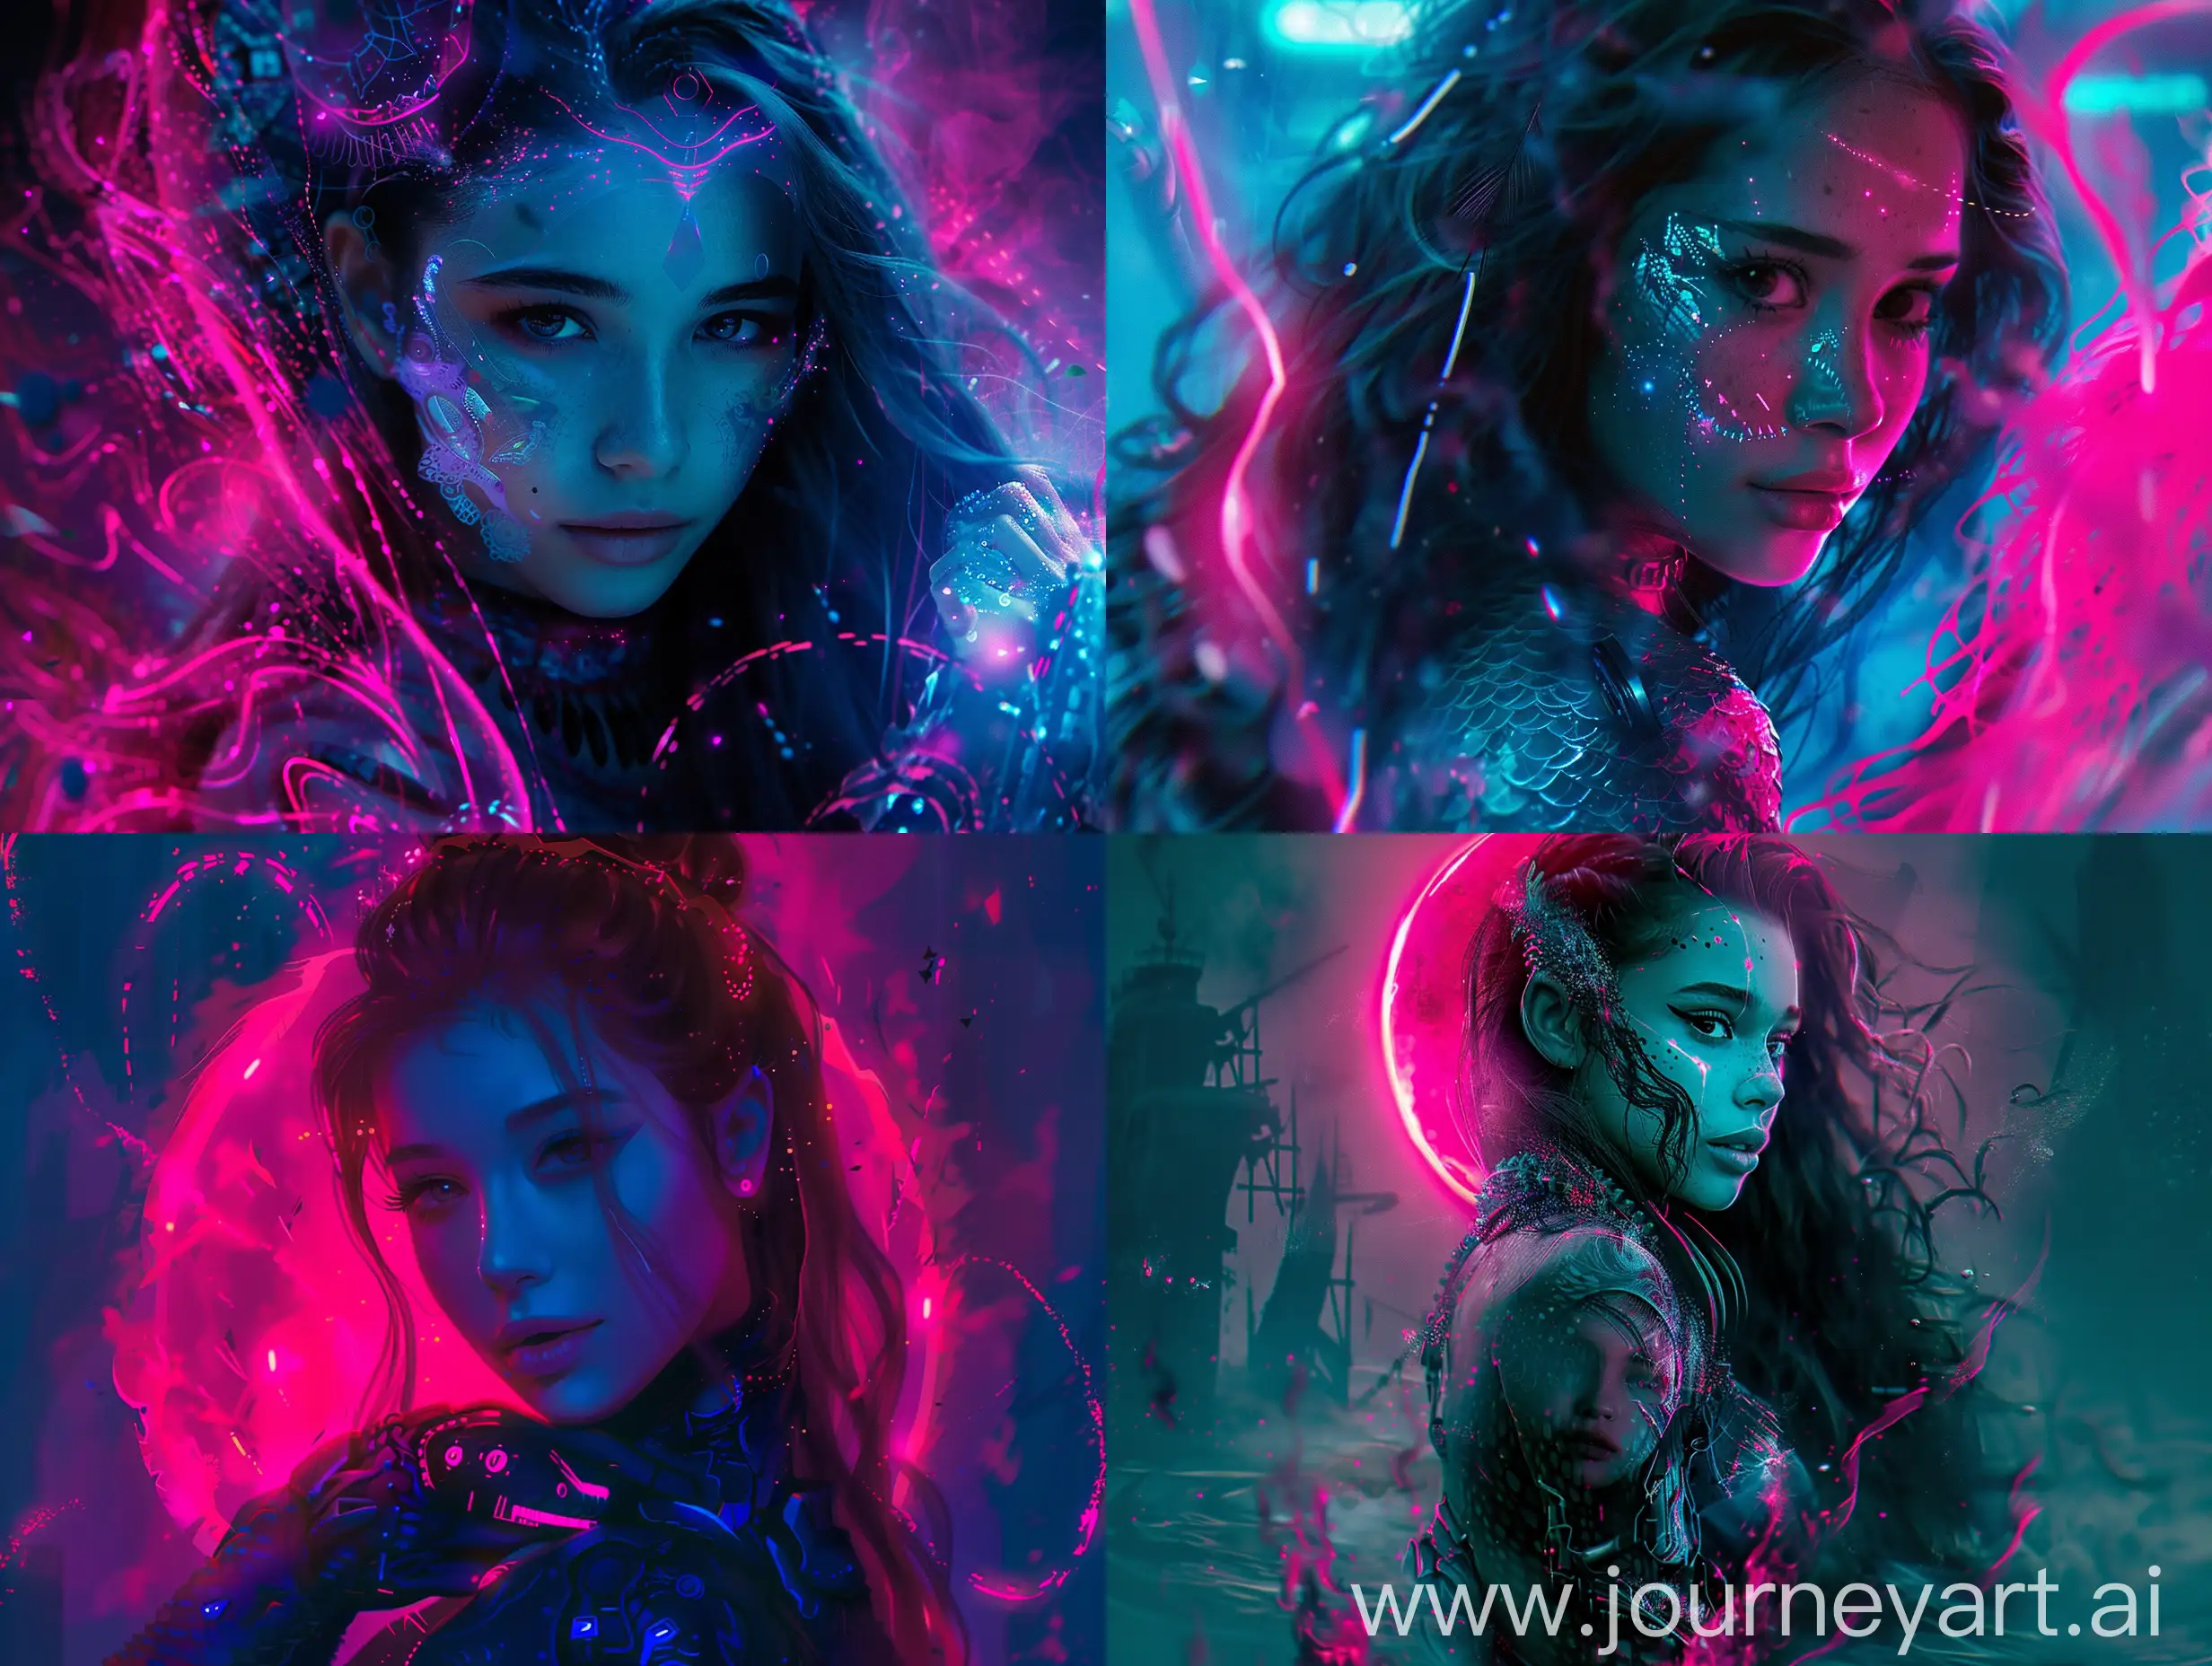 Mermaid, darkness, potrait,  with subtle pink and blue gradients, realistic, 1girl, beautiful, high detail, attractive, fit, pretty face, cyberpunk fantasy, futuristic fairy psychedelic tale, robotic lasers fairy dancing rave in an neon incandescent flame, moonlight enveloping attire tech-punk mech-punk cityscape